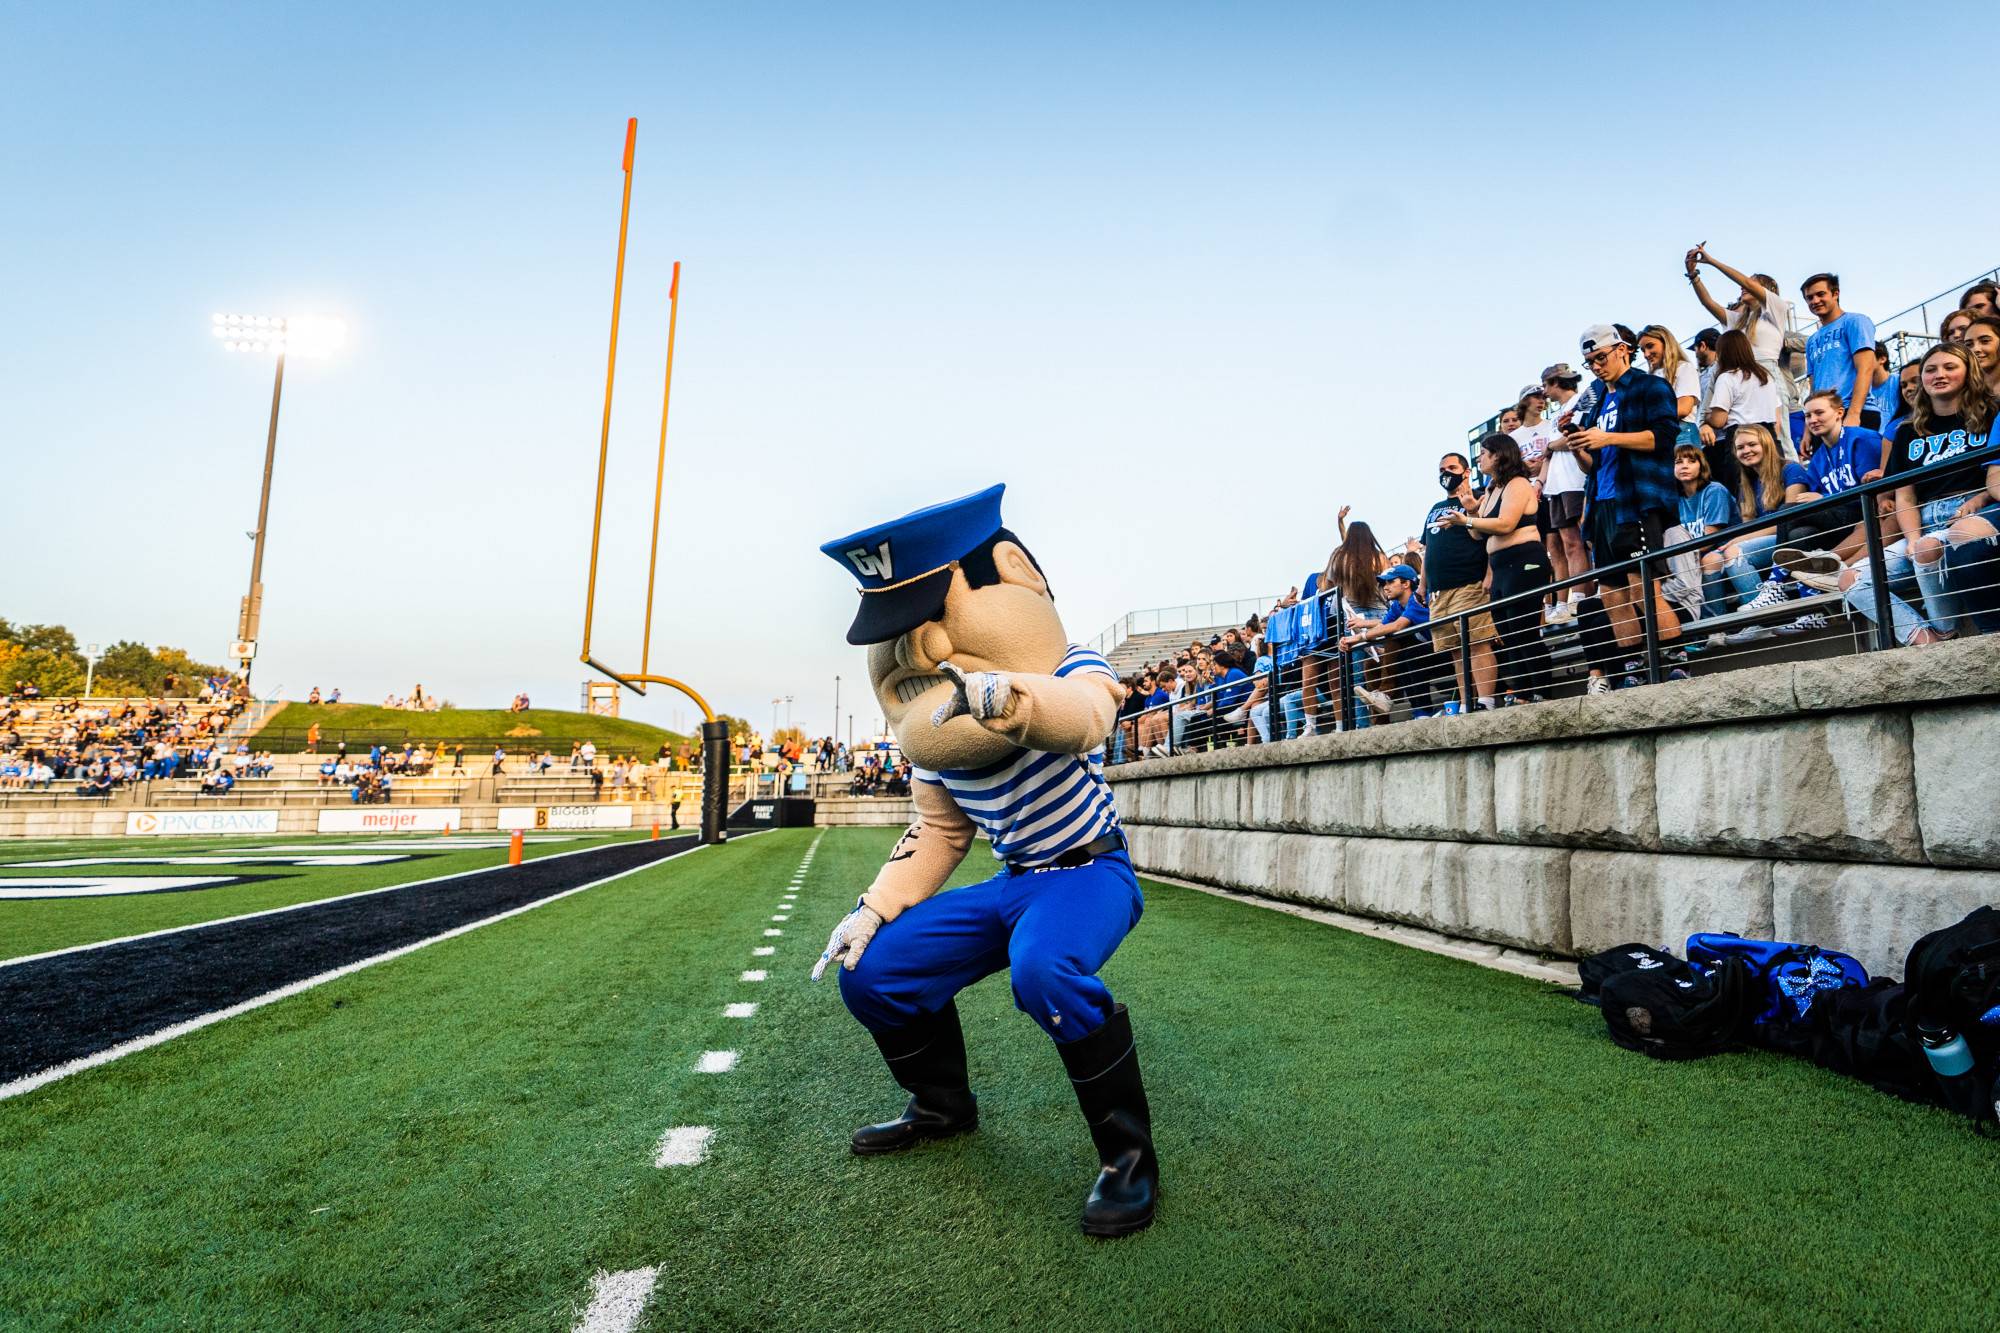 Louie points at camera during GVSU Football game